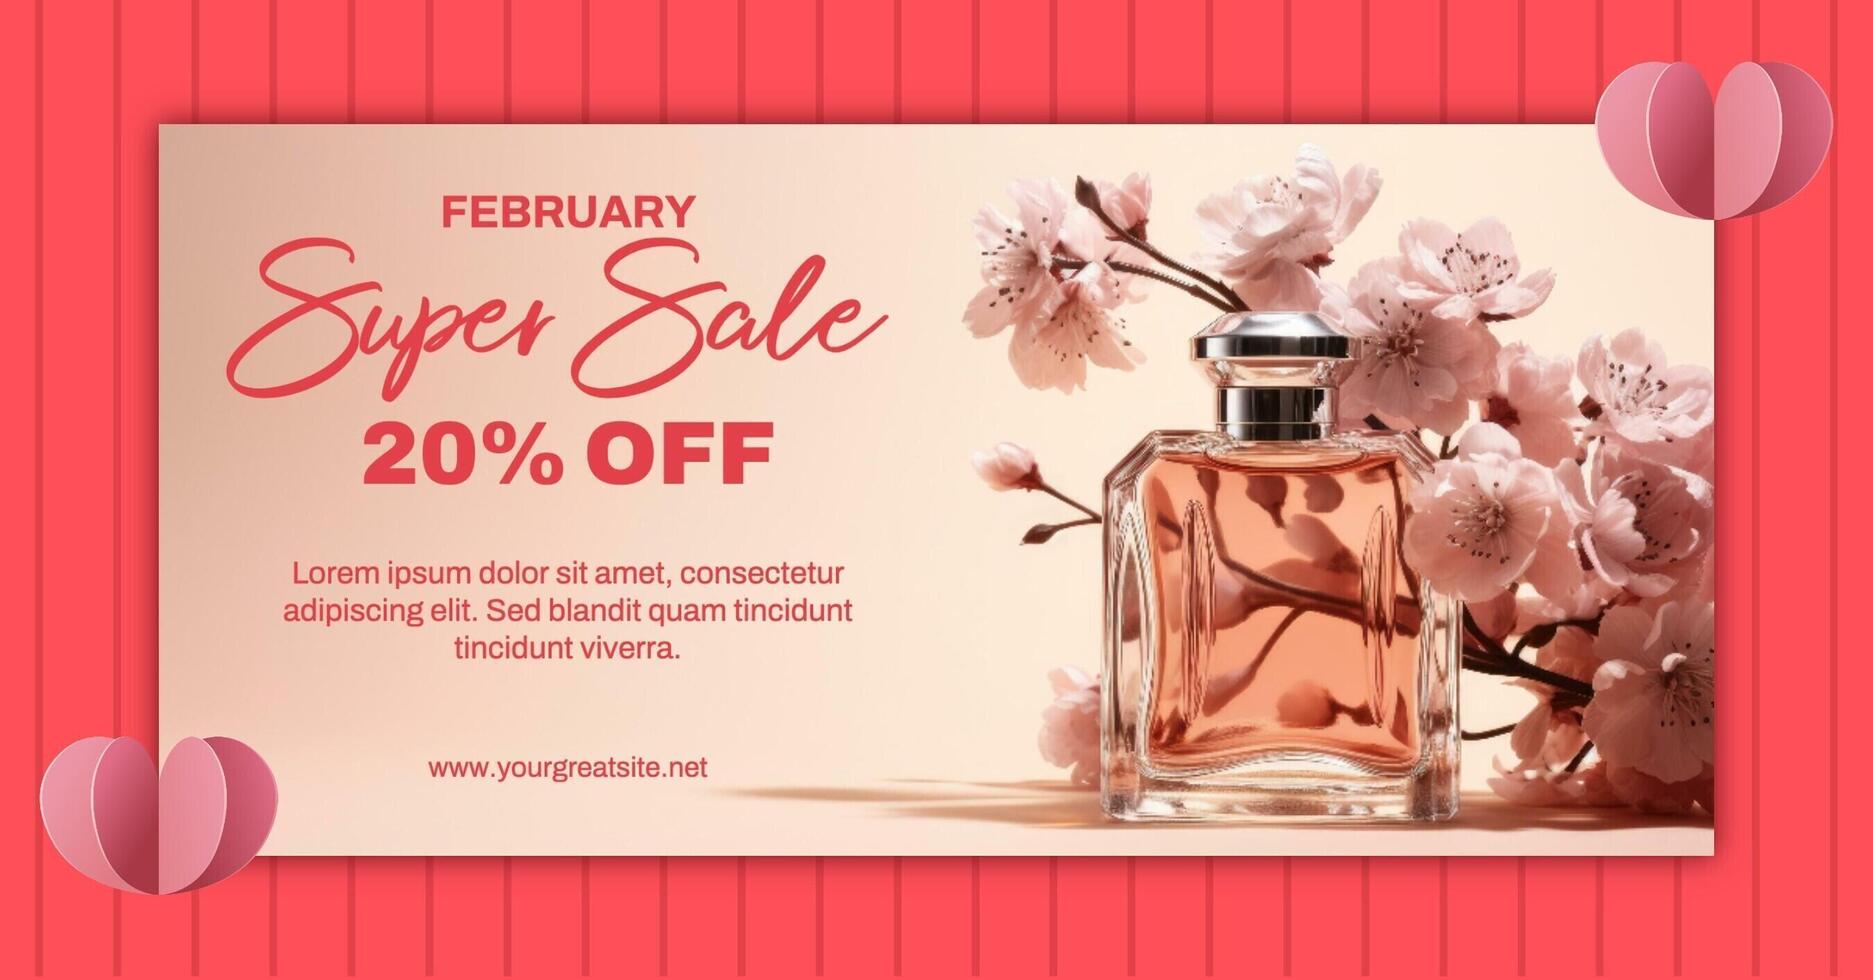 February Super Sale for Valentine's Day Event Facebook Ads template